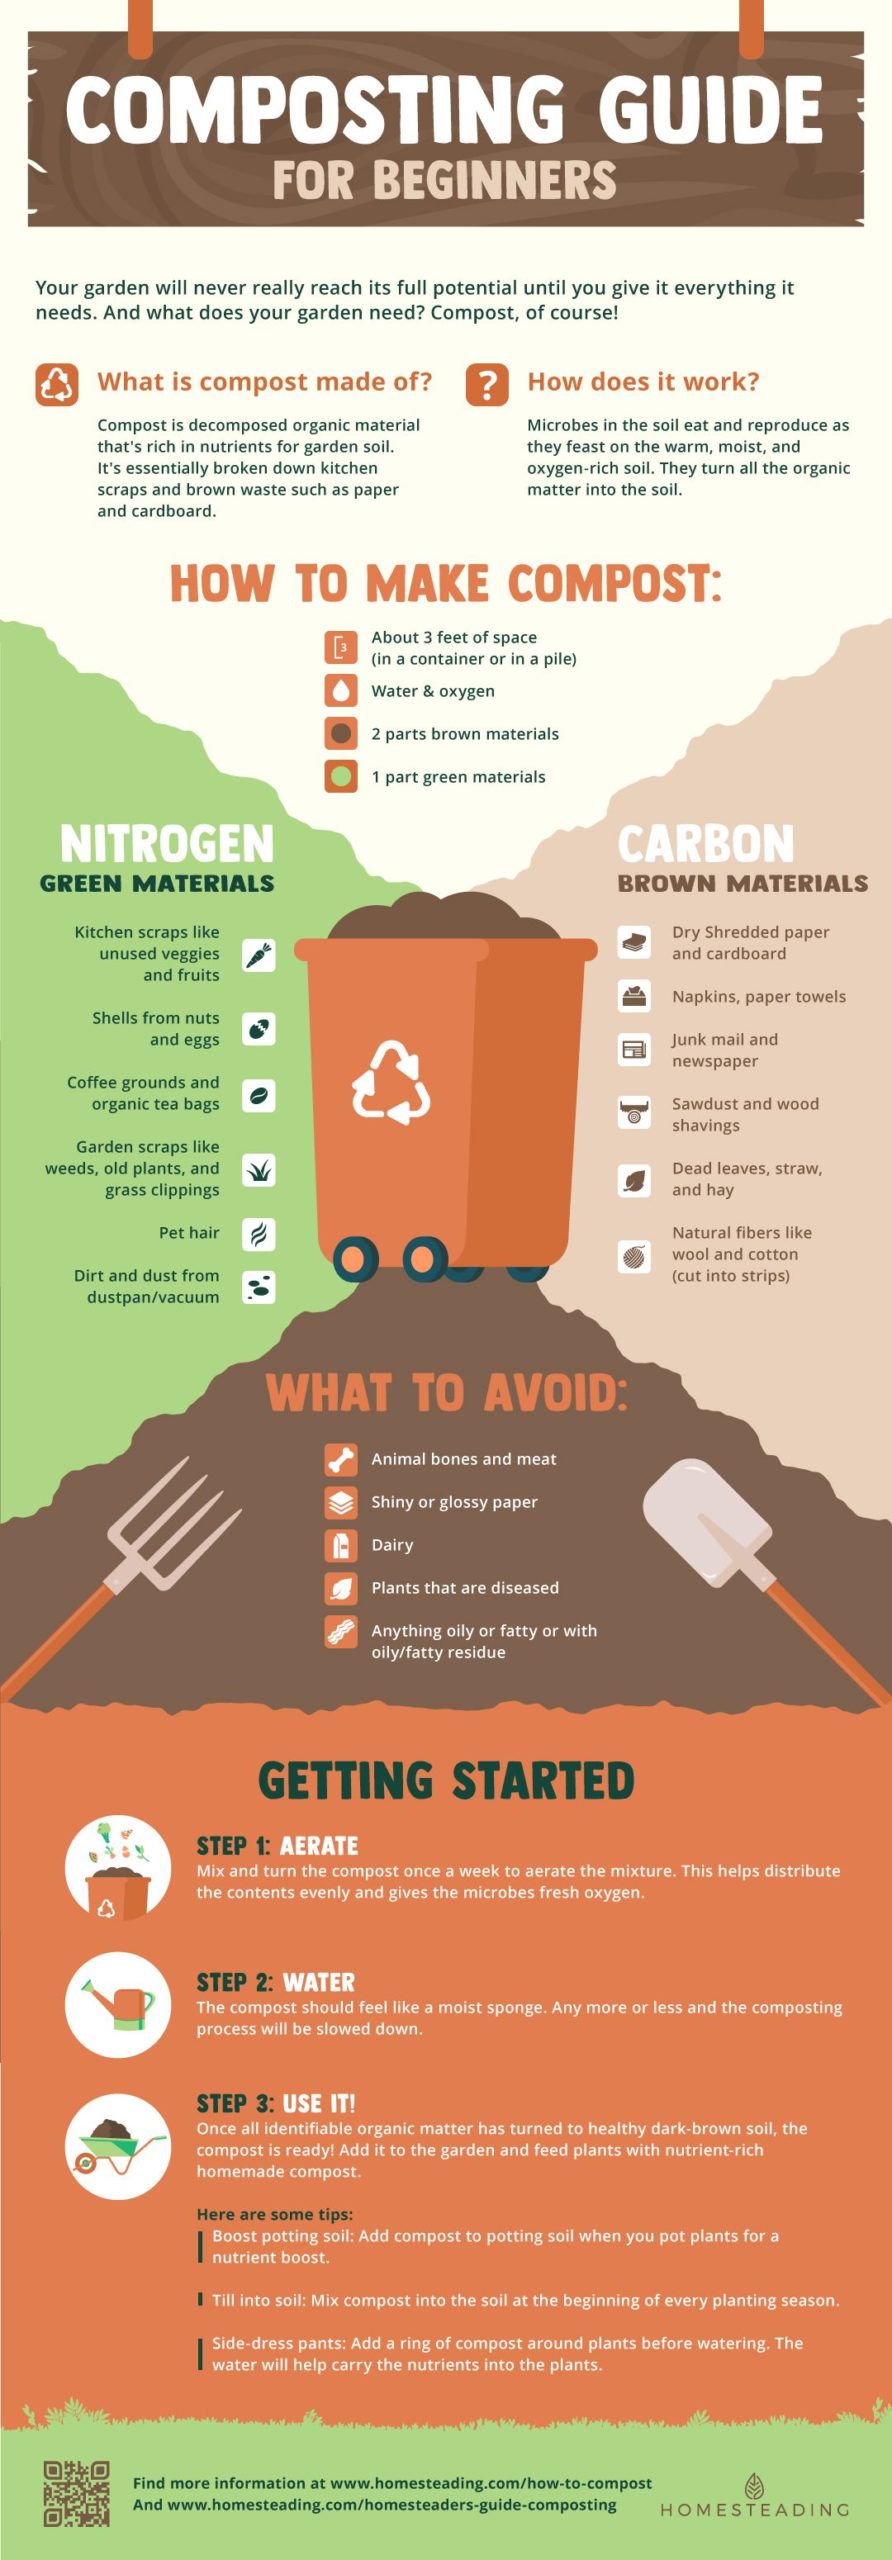 How To Compost [INFOGRAPHIC] | Homesteading Composting Guide